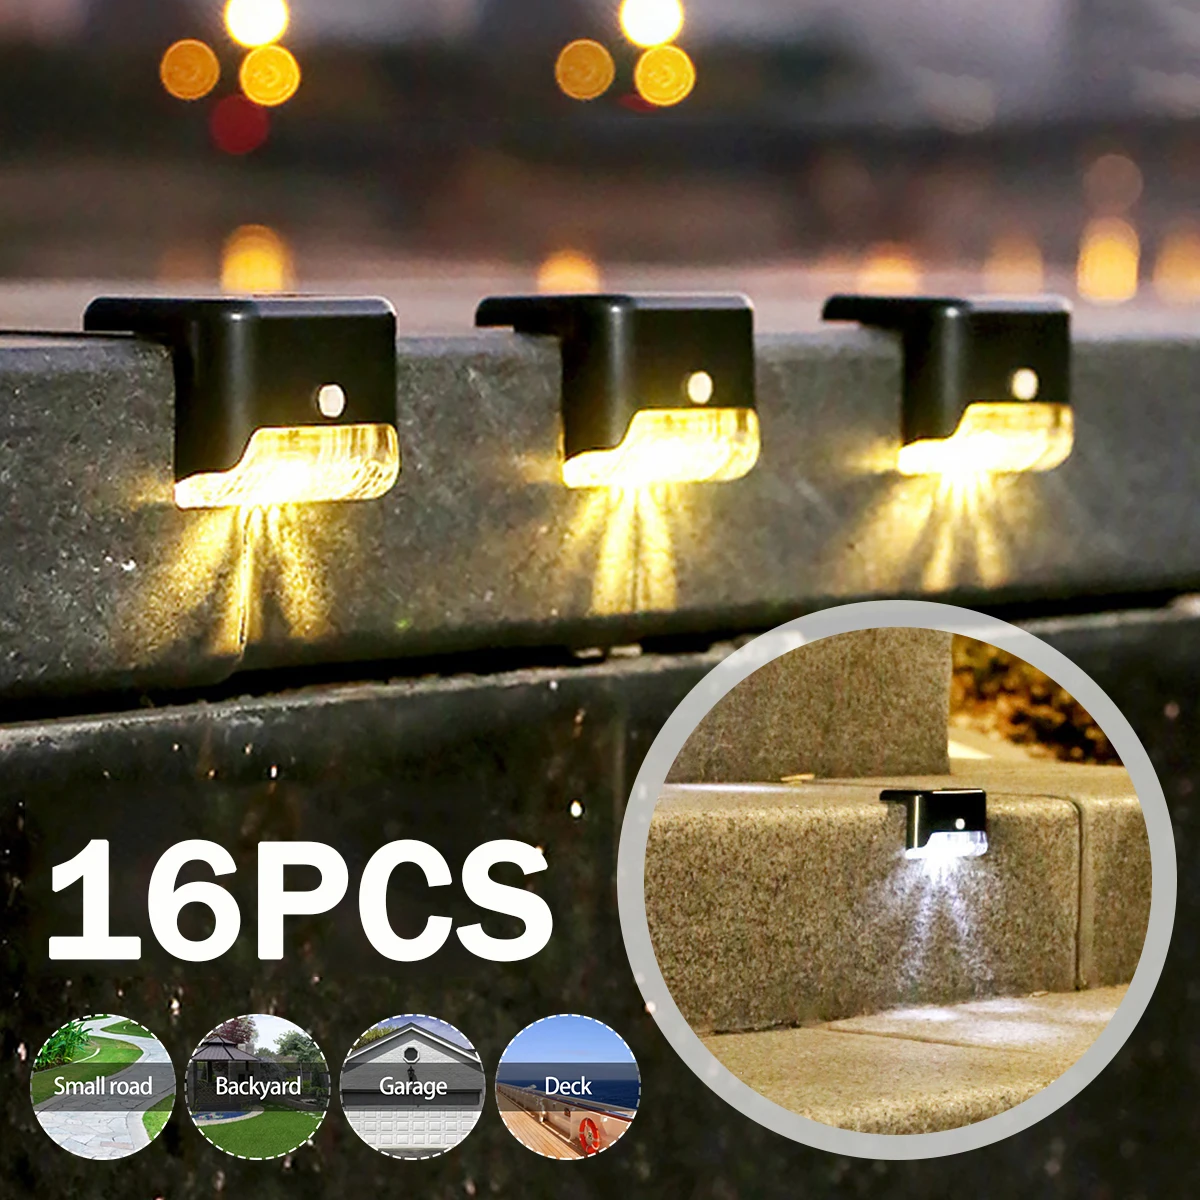 Solar Light Outdoors Ip65 Luces Solares Para Ce Exterior Step Deck Lights Lamps Garden Lighting Fence Courtyard Decor new upgraded bsw 200w stage beam lights zoom luces dj dmx beam spot wash 3in1 200 watts led spot moving head light